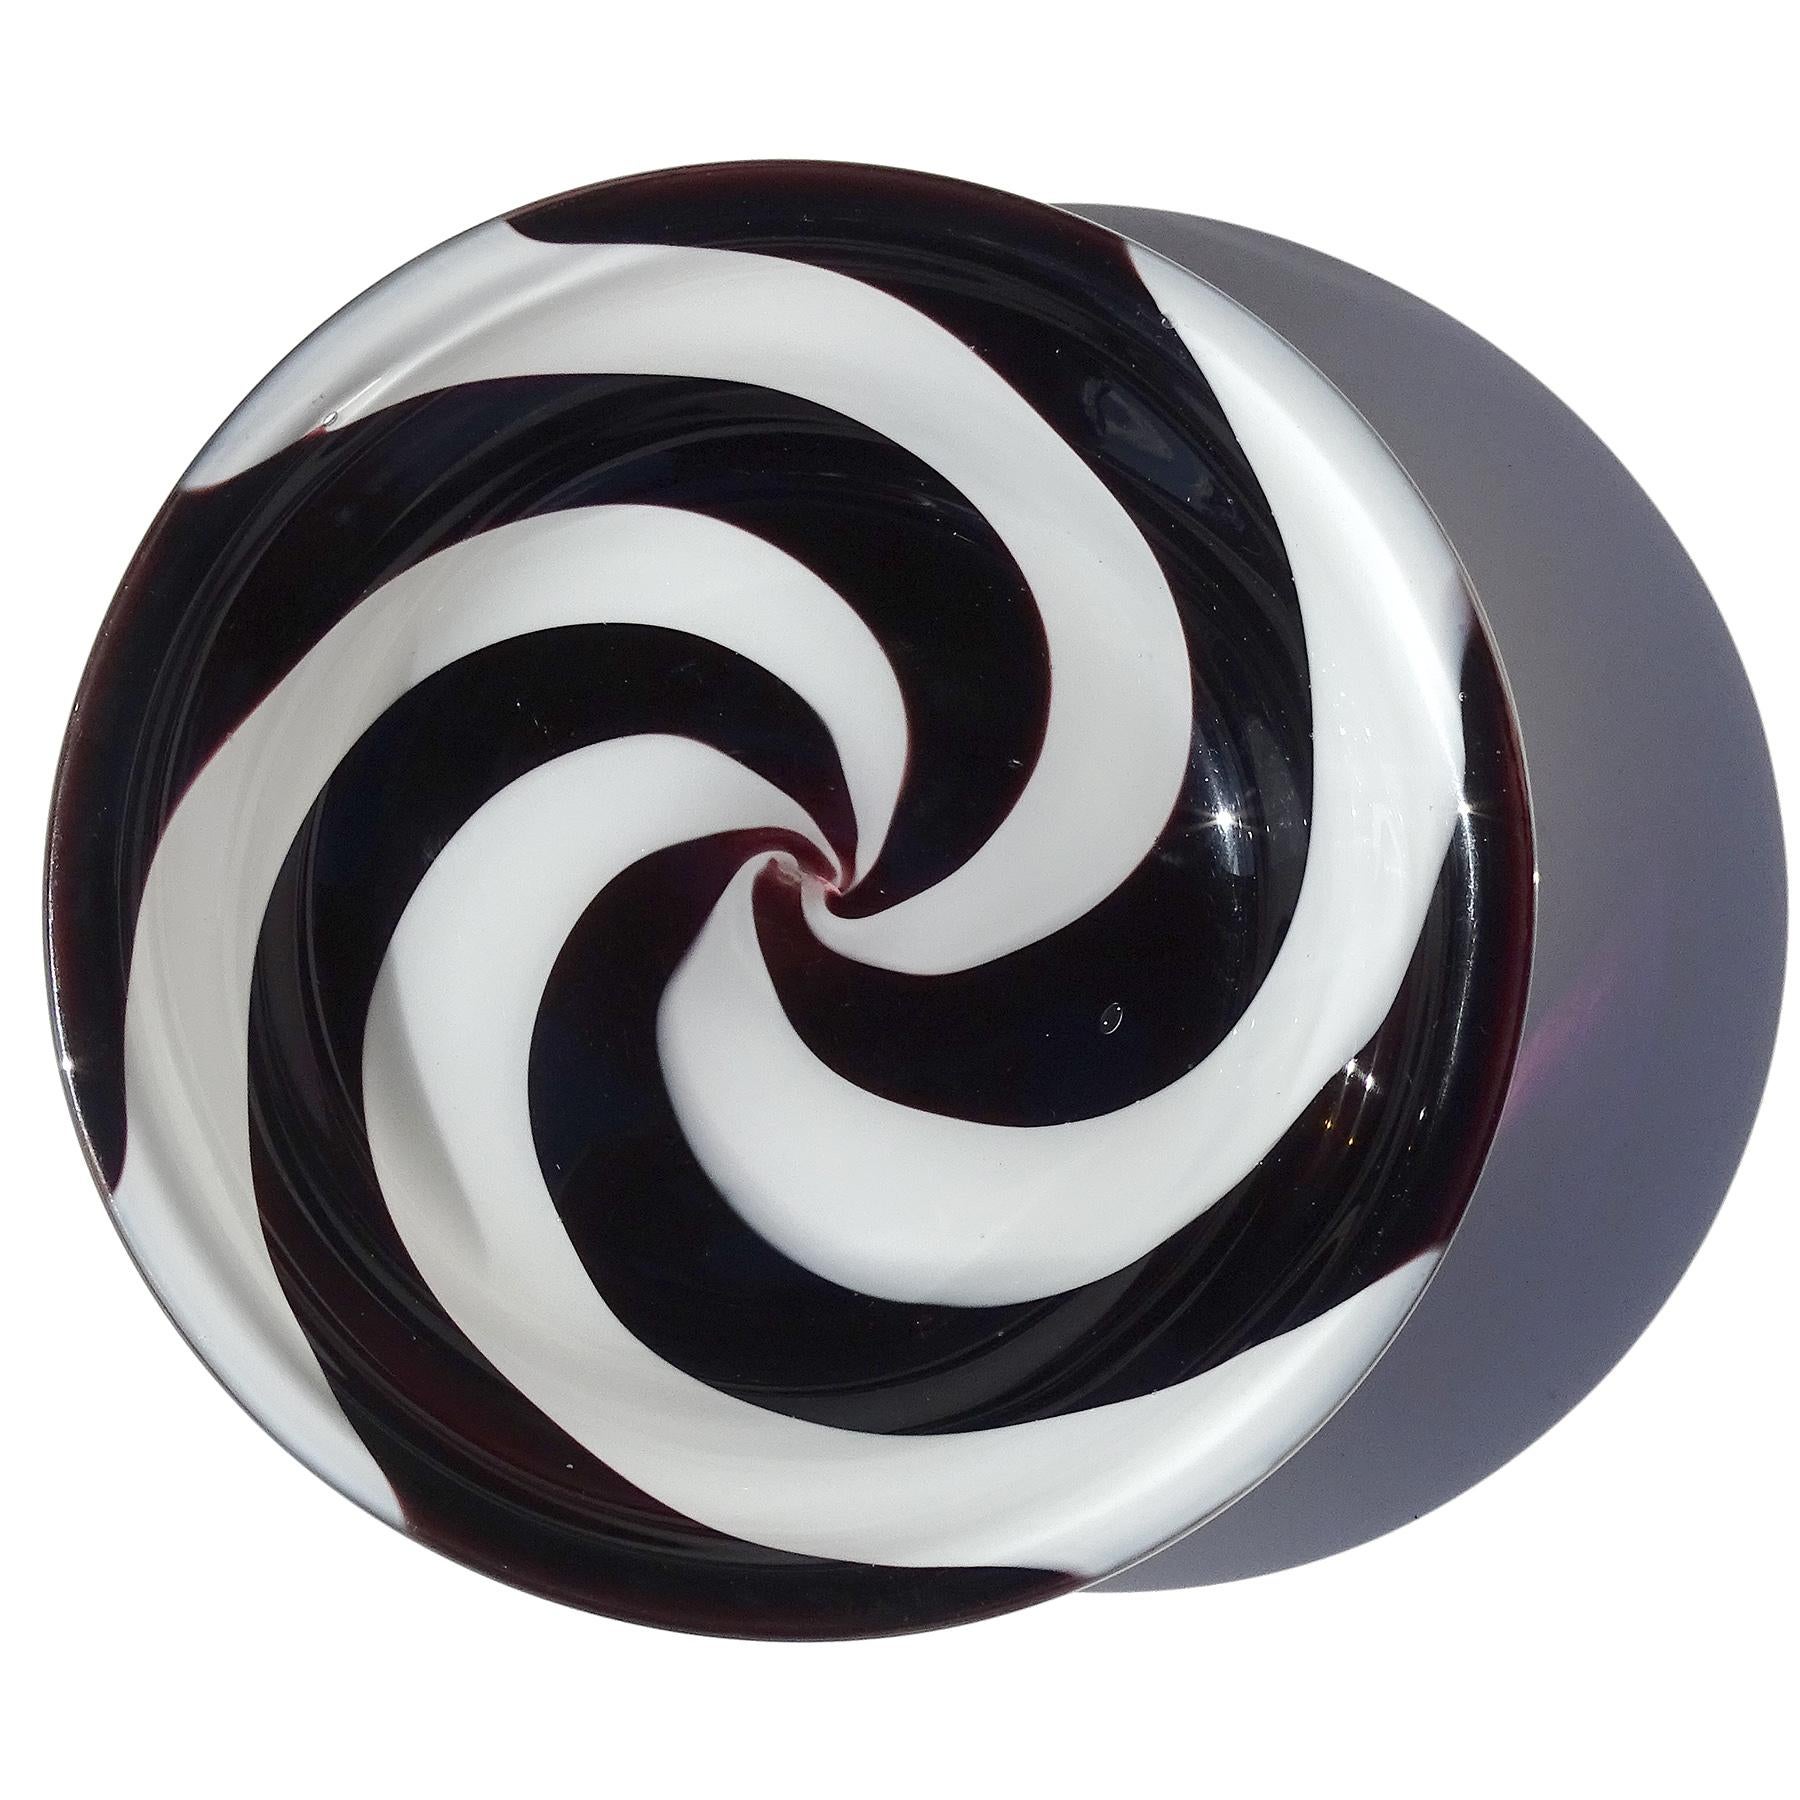 Beautiful vintage Murano hand blown white and black stripes optic swirl Italian art glass bowl or vide-poche. The bowl has been documented to designer Fulvio Bianconi, for the Venini company. Described as an 